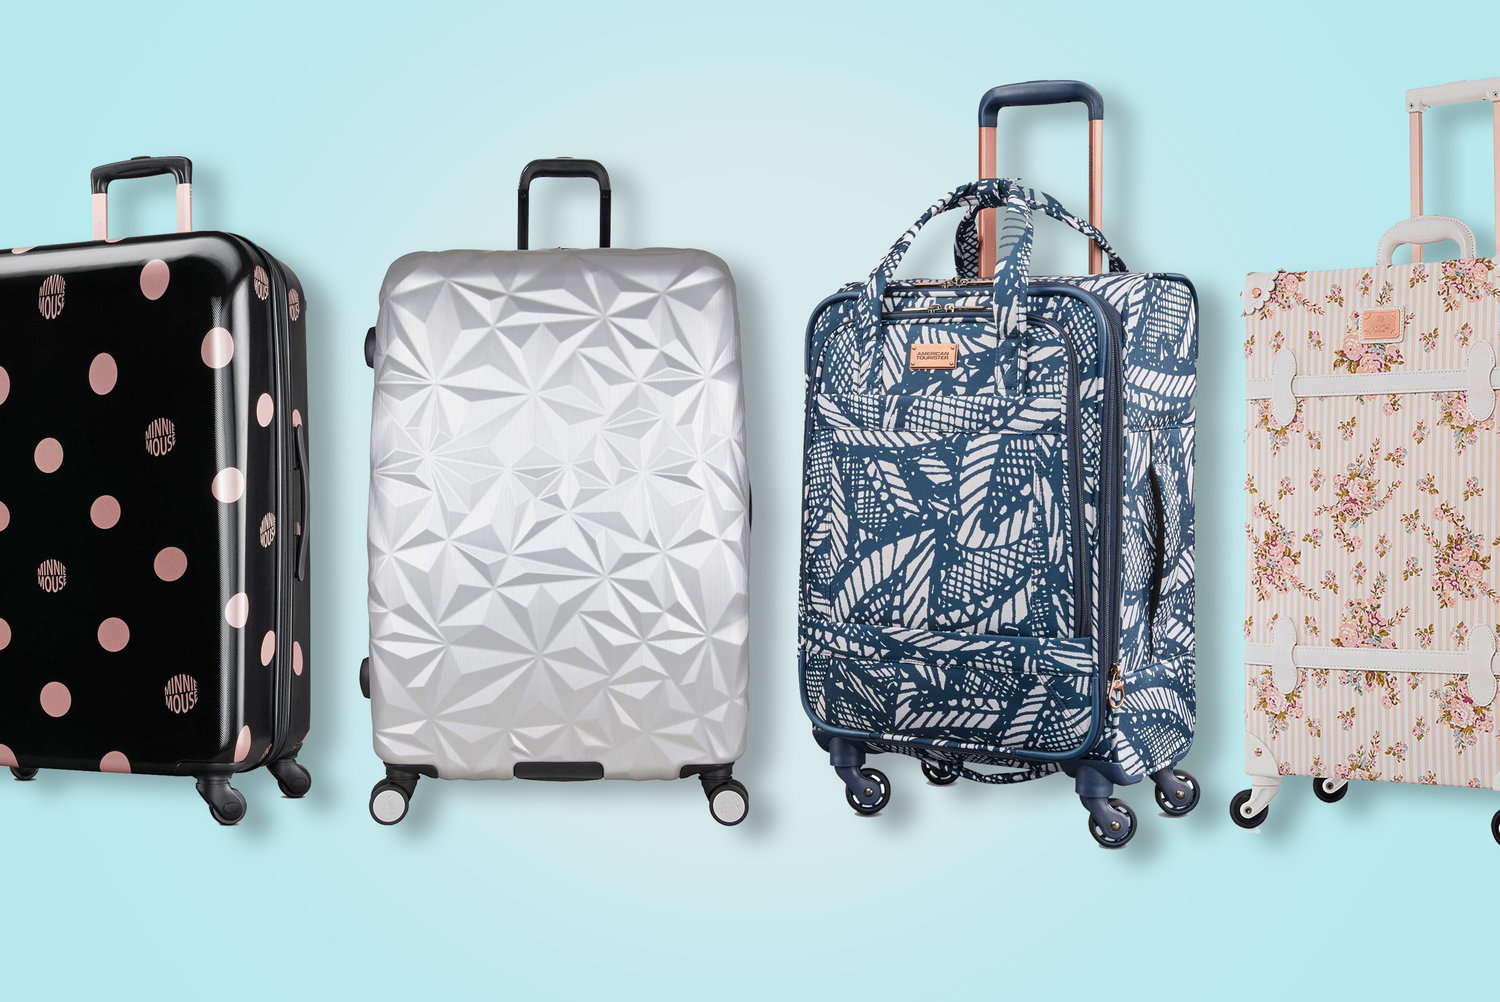 Pamflet koppeling Vakantie These Cute Suitcases For Teens will Upgrade Any Travel Style | Backpackies